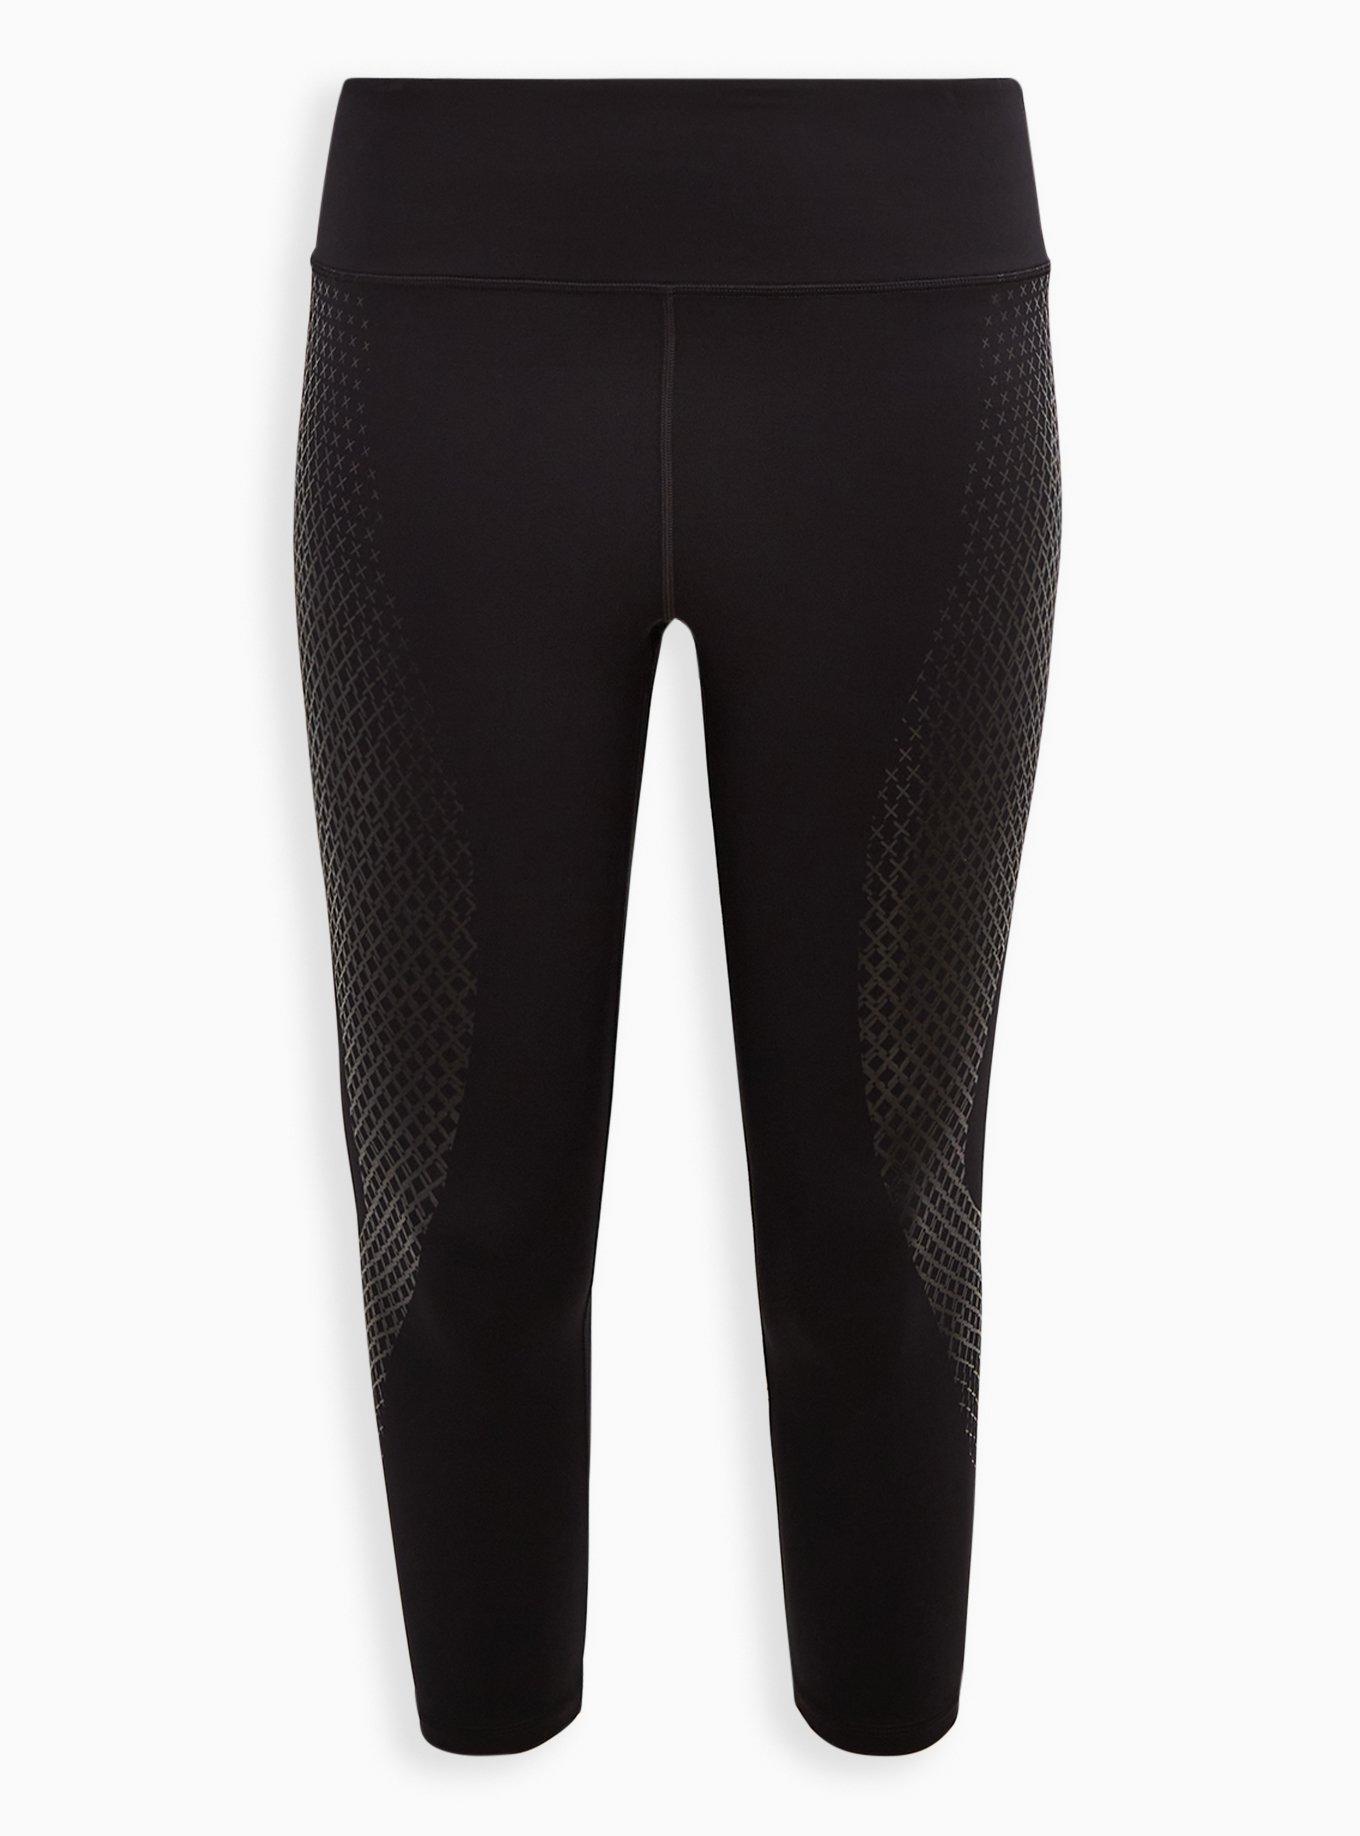 Compression Leggings For Circulation Plus Sizewise